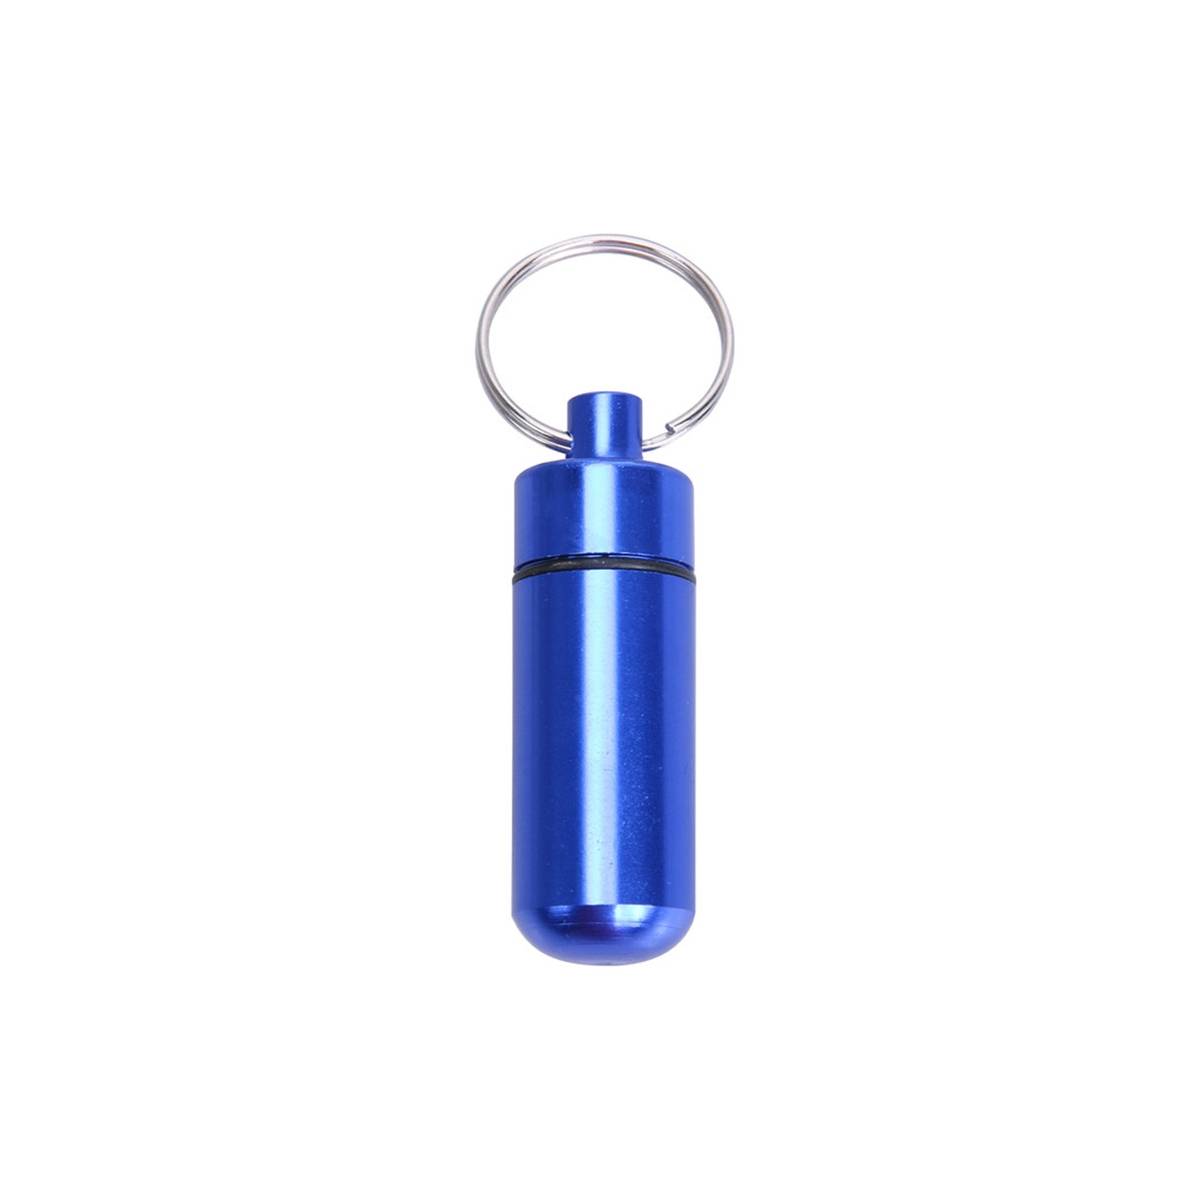 Waterproof container for pills or geocaching (bison) - Blue 